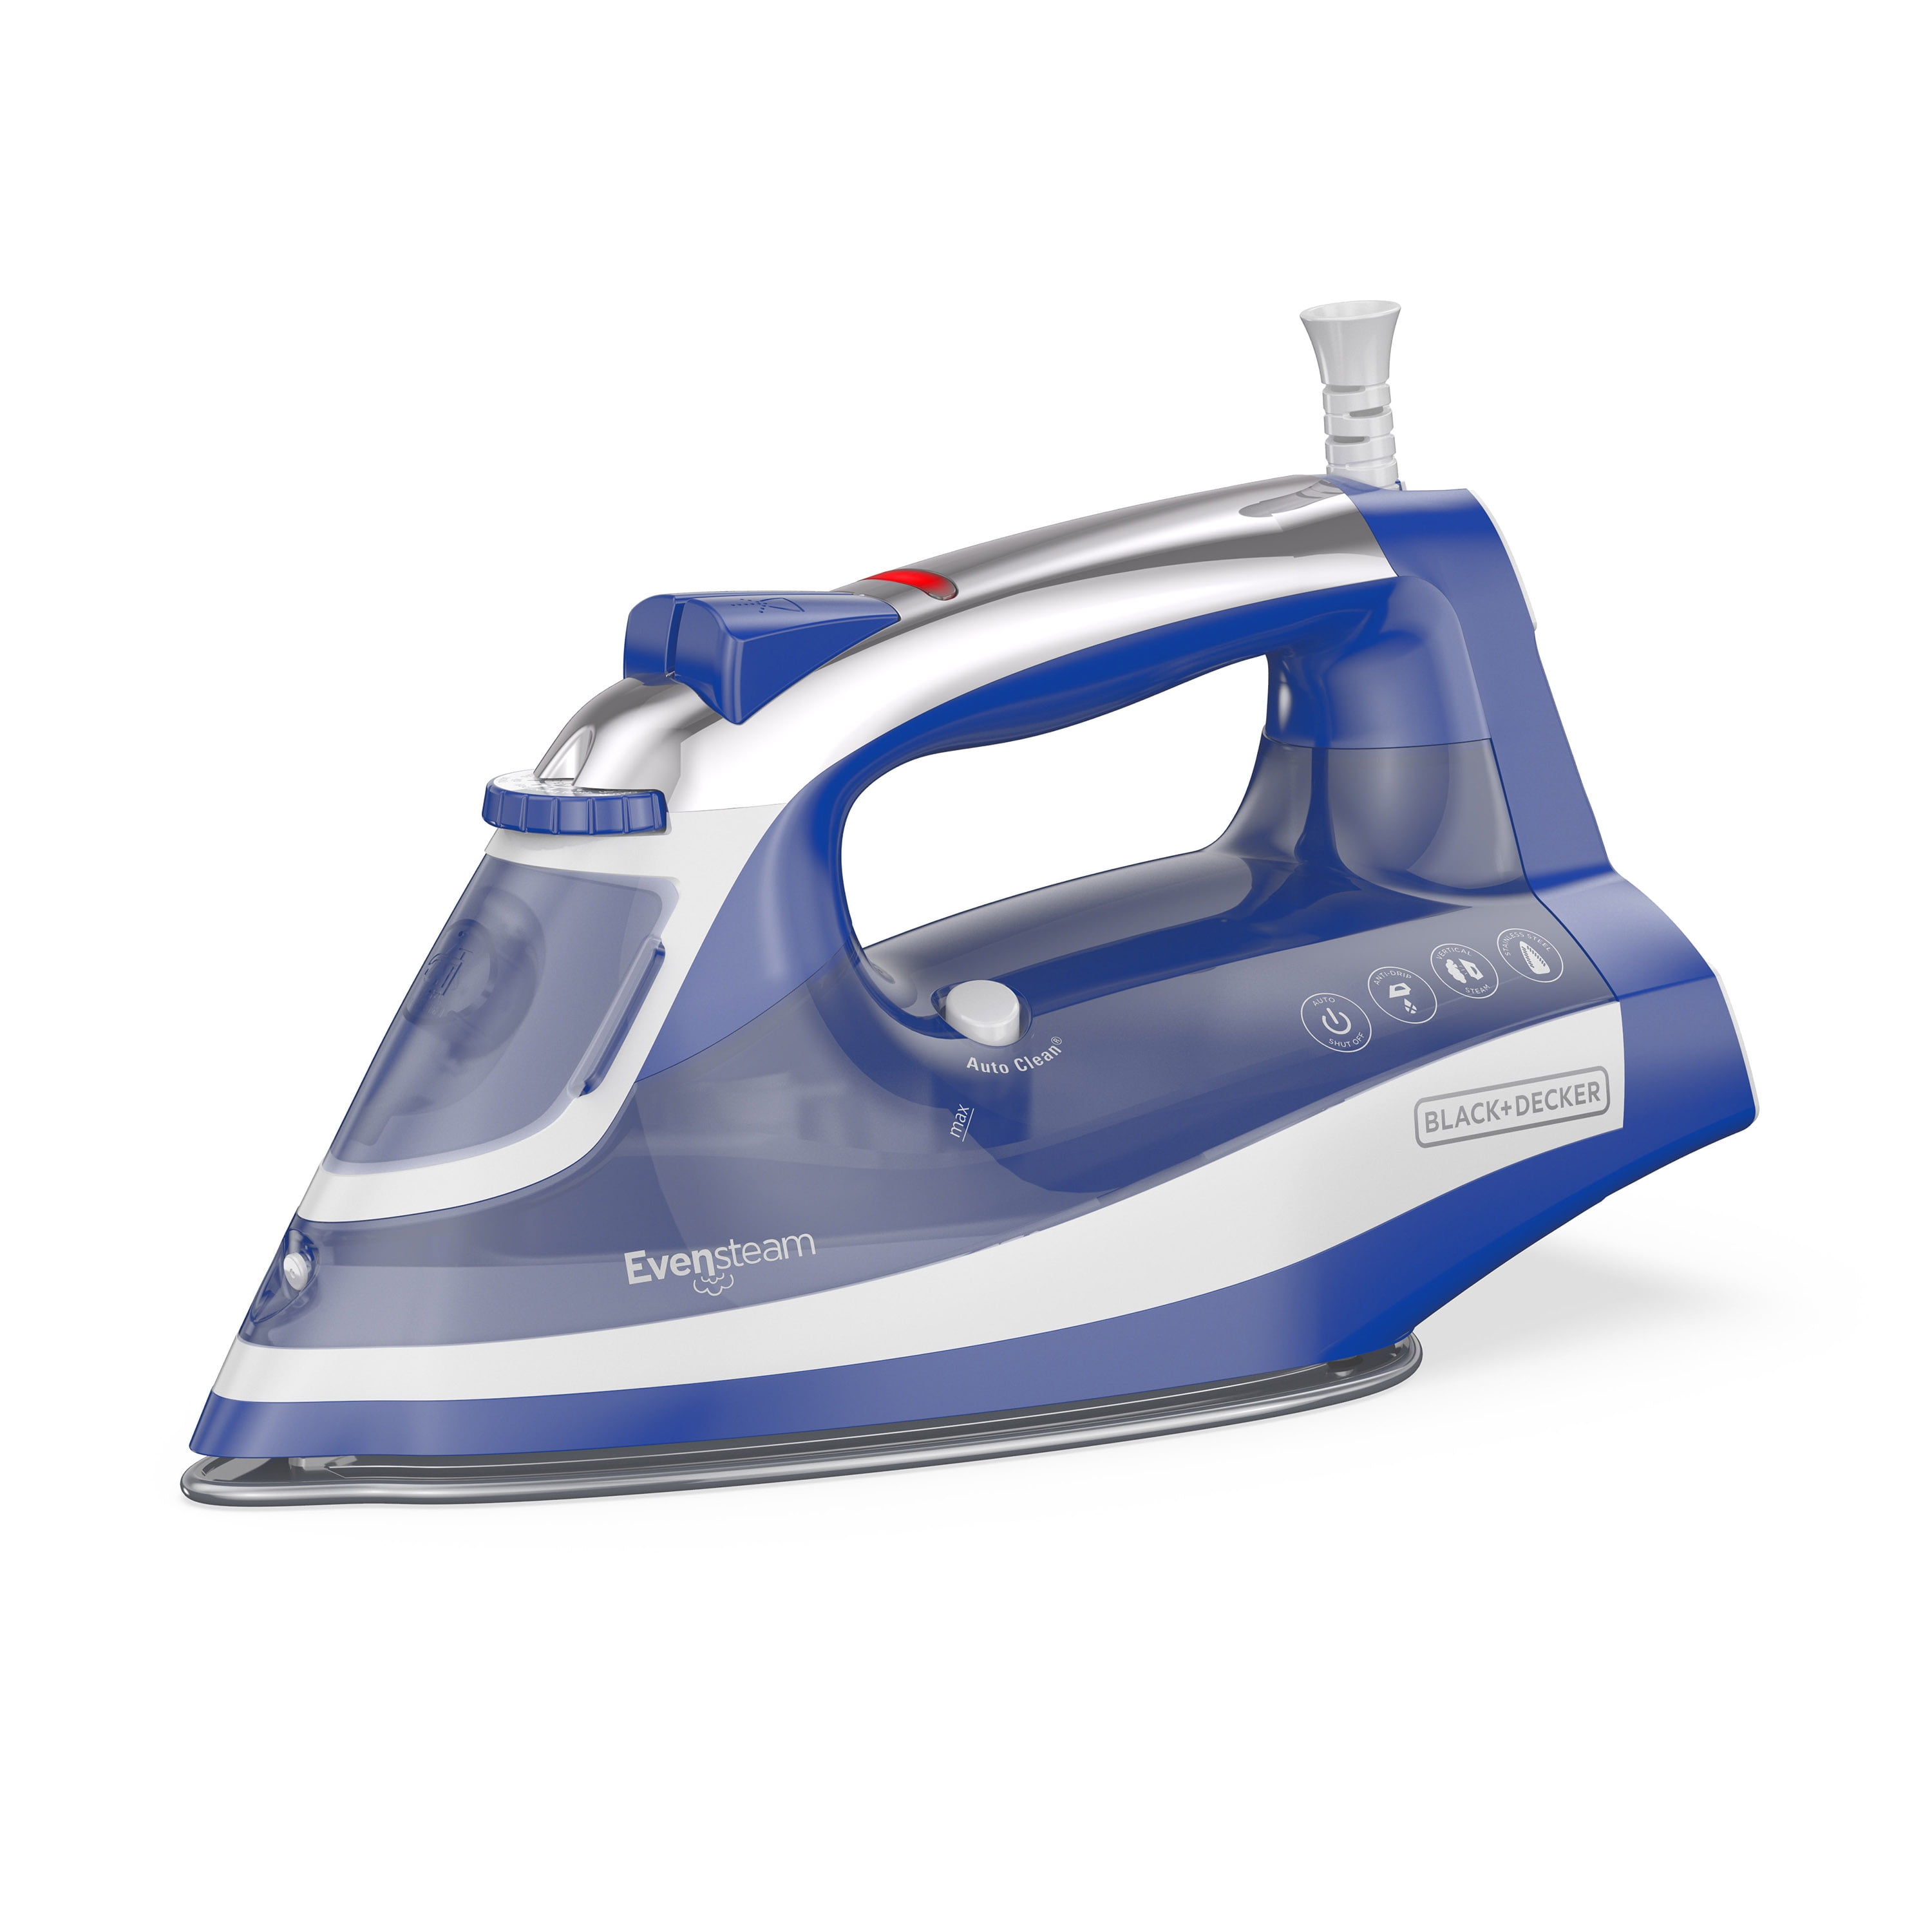 Product Review – Black + Decker One Step Steam Iron – Model IR18XS